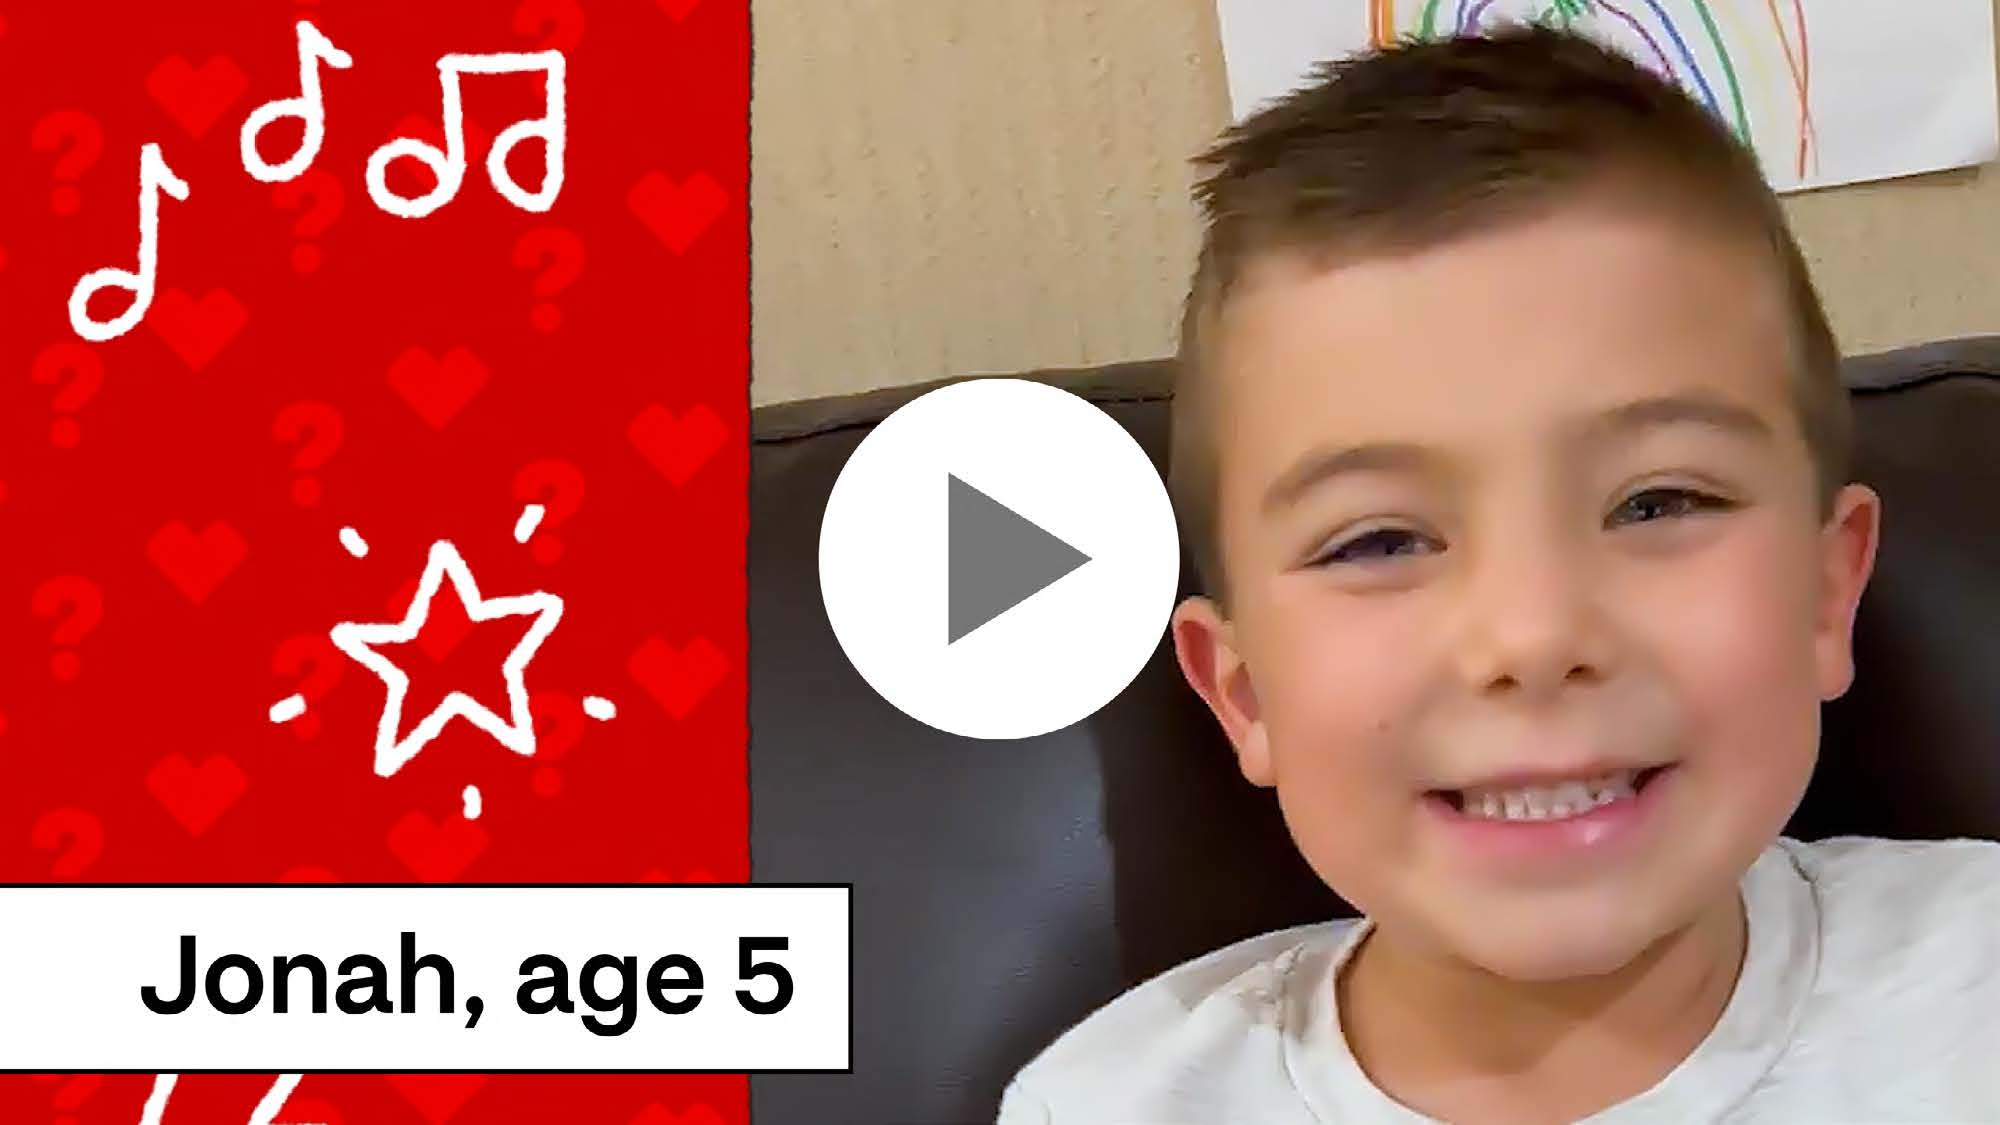 Play video of Jonah, age 5, asking “How long will getting the COVID-19 vaccine take?”